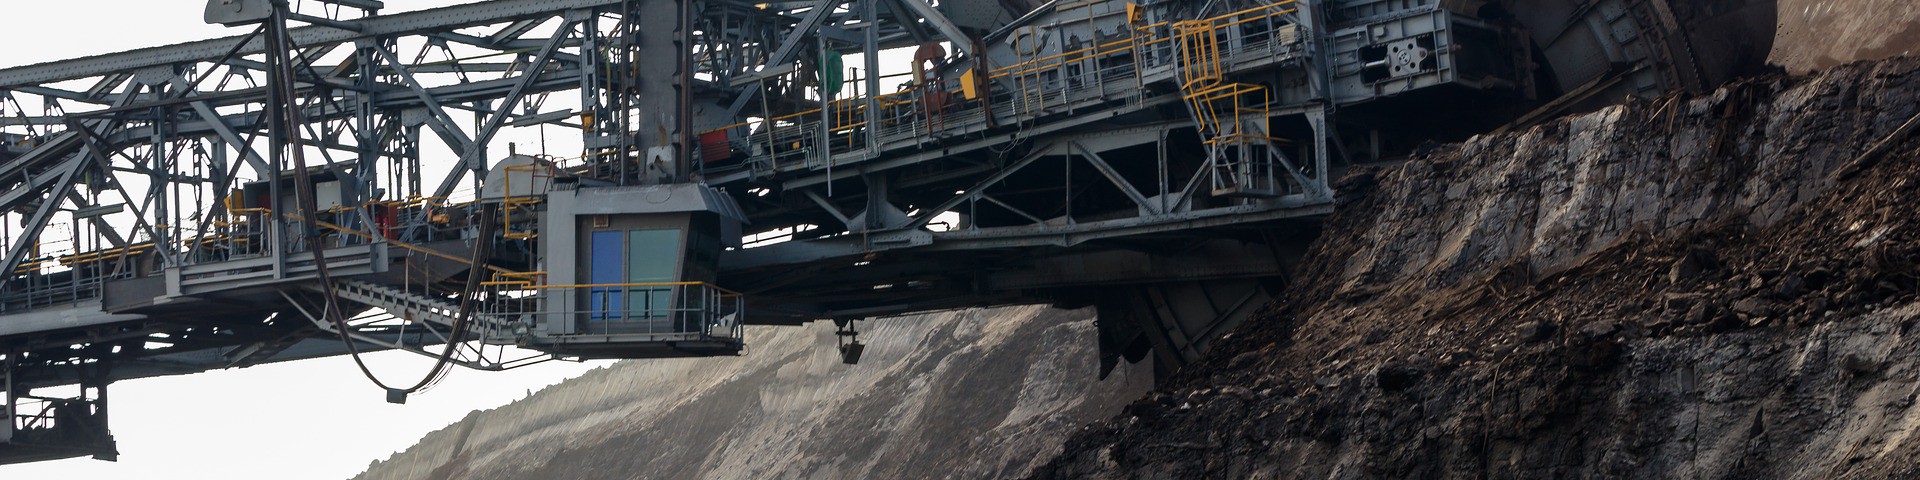 Russia relies on coal mining